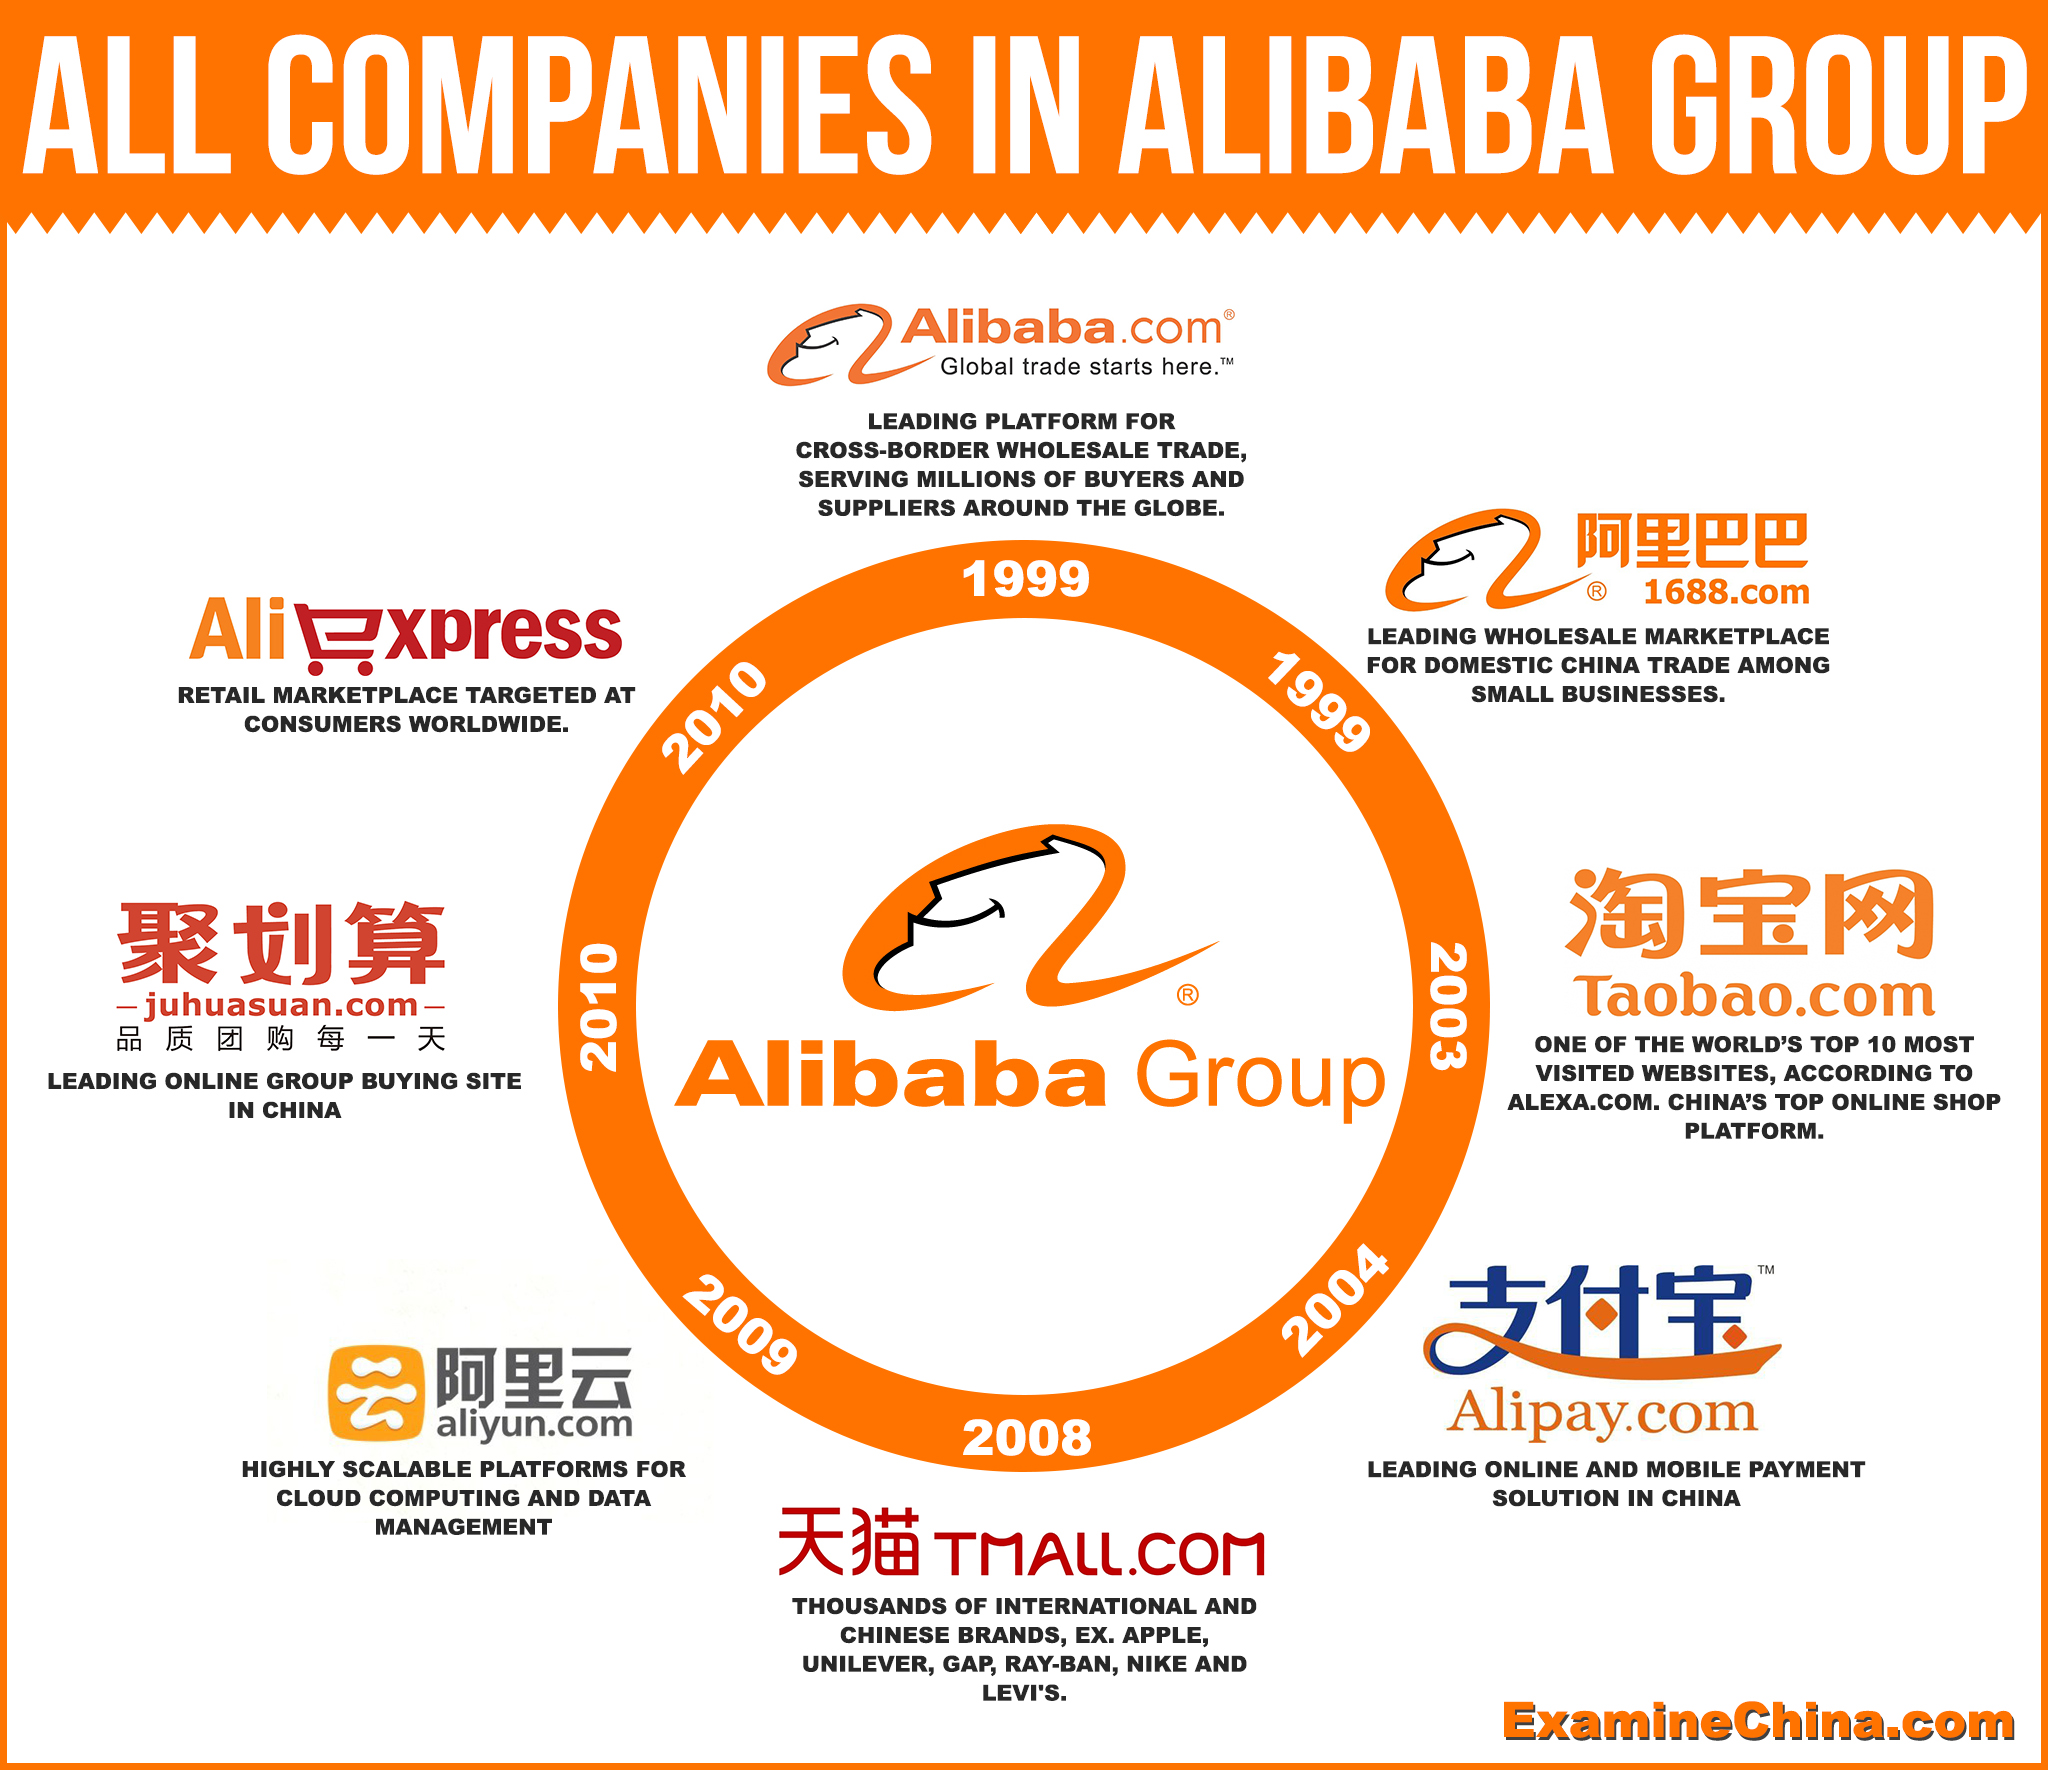 All companies in Alibaba Group. Source Image: UBC Blogs